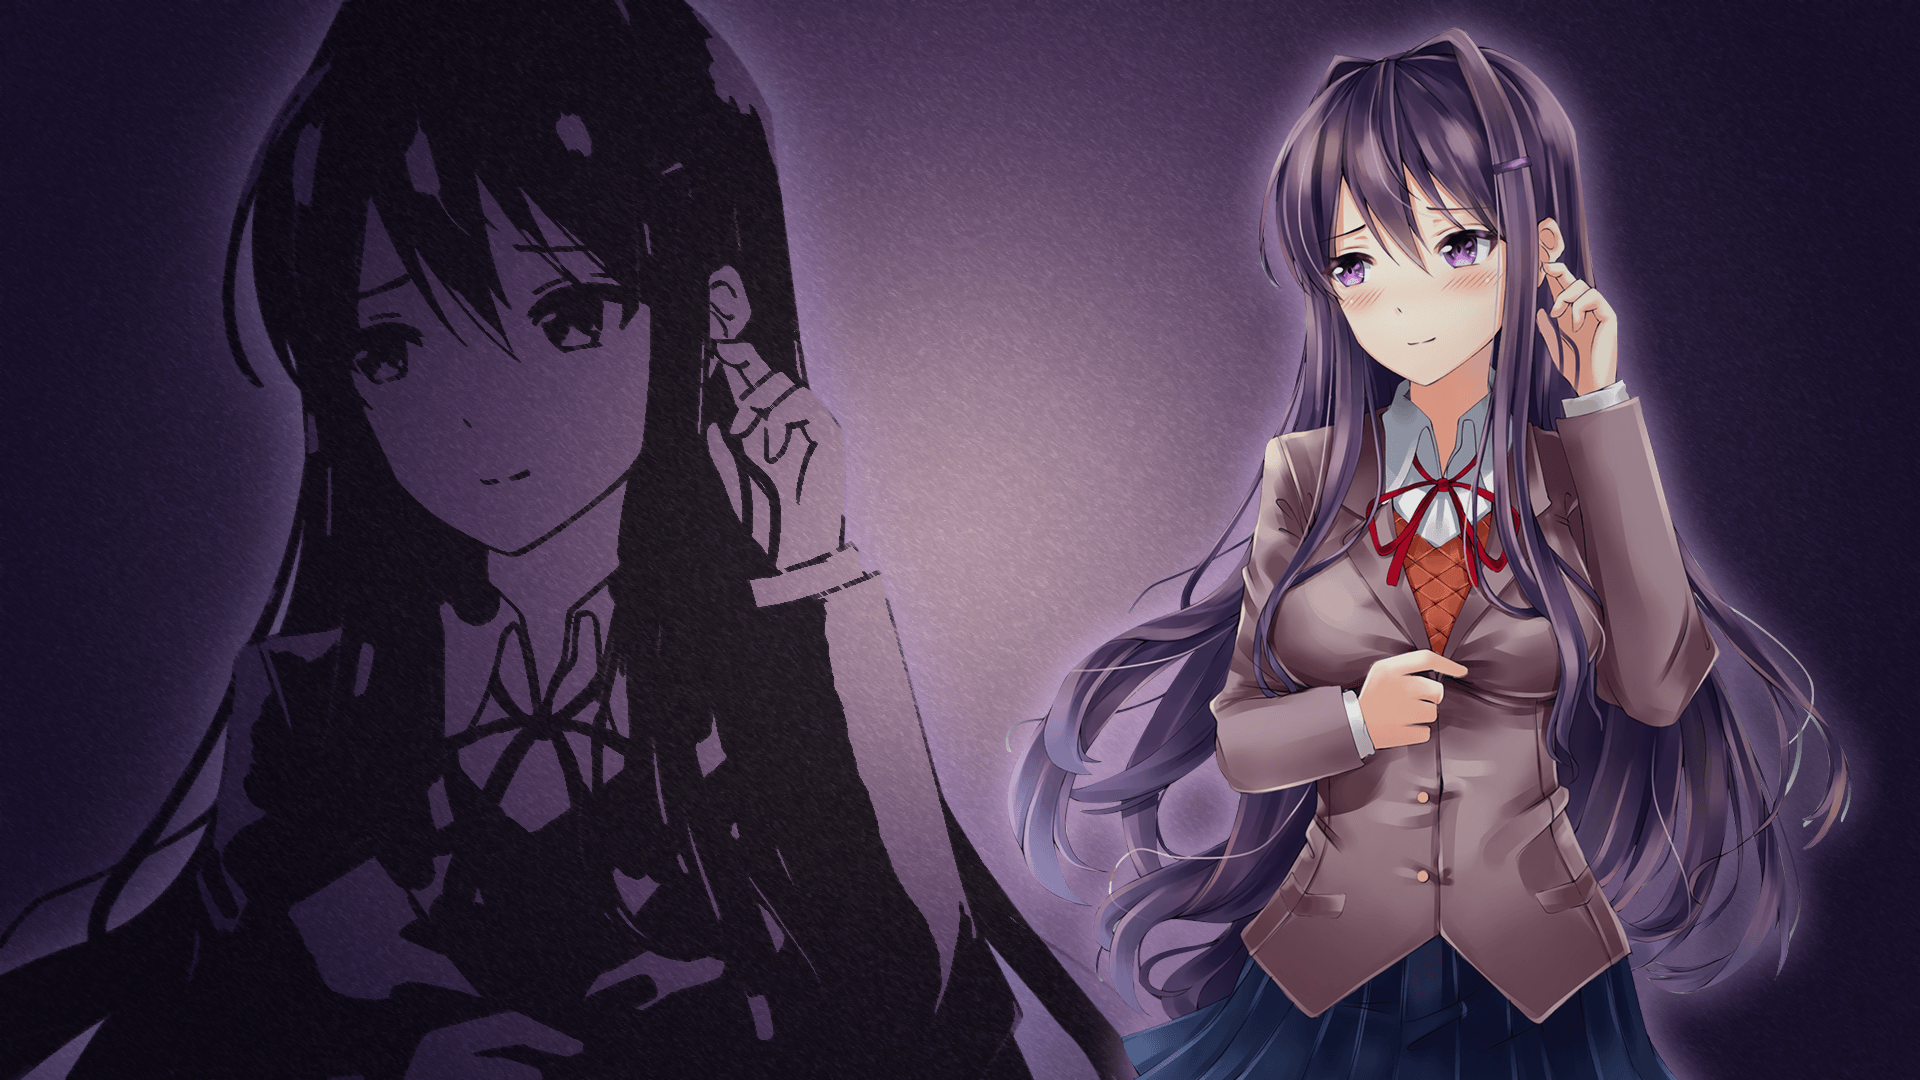 Made another Yuri wallpaper with a friend